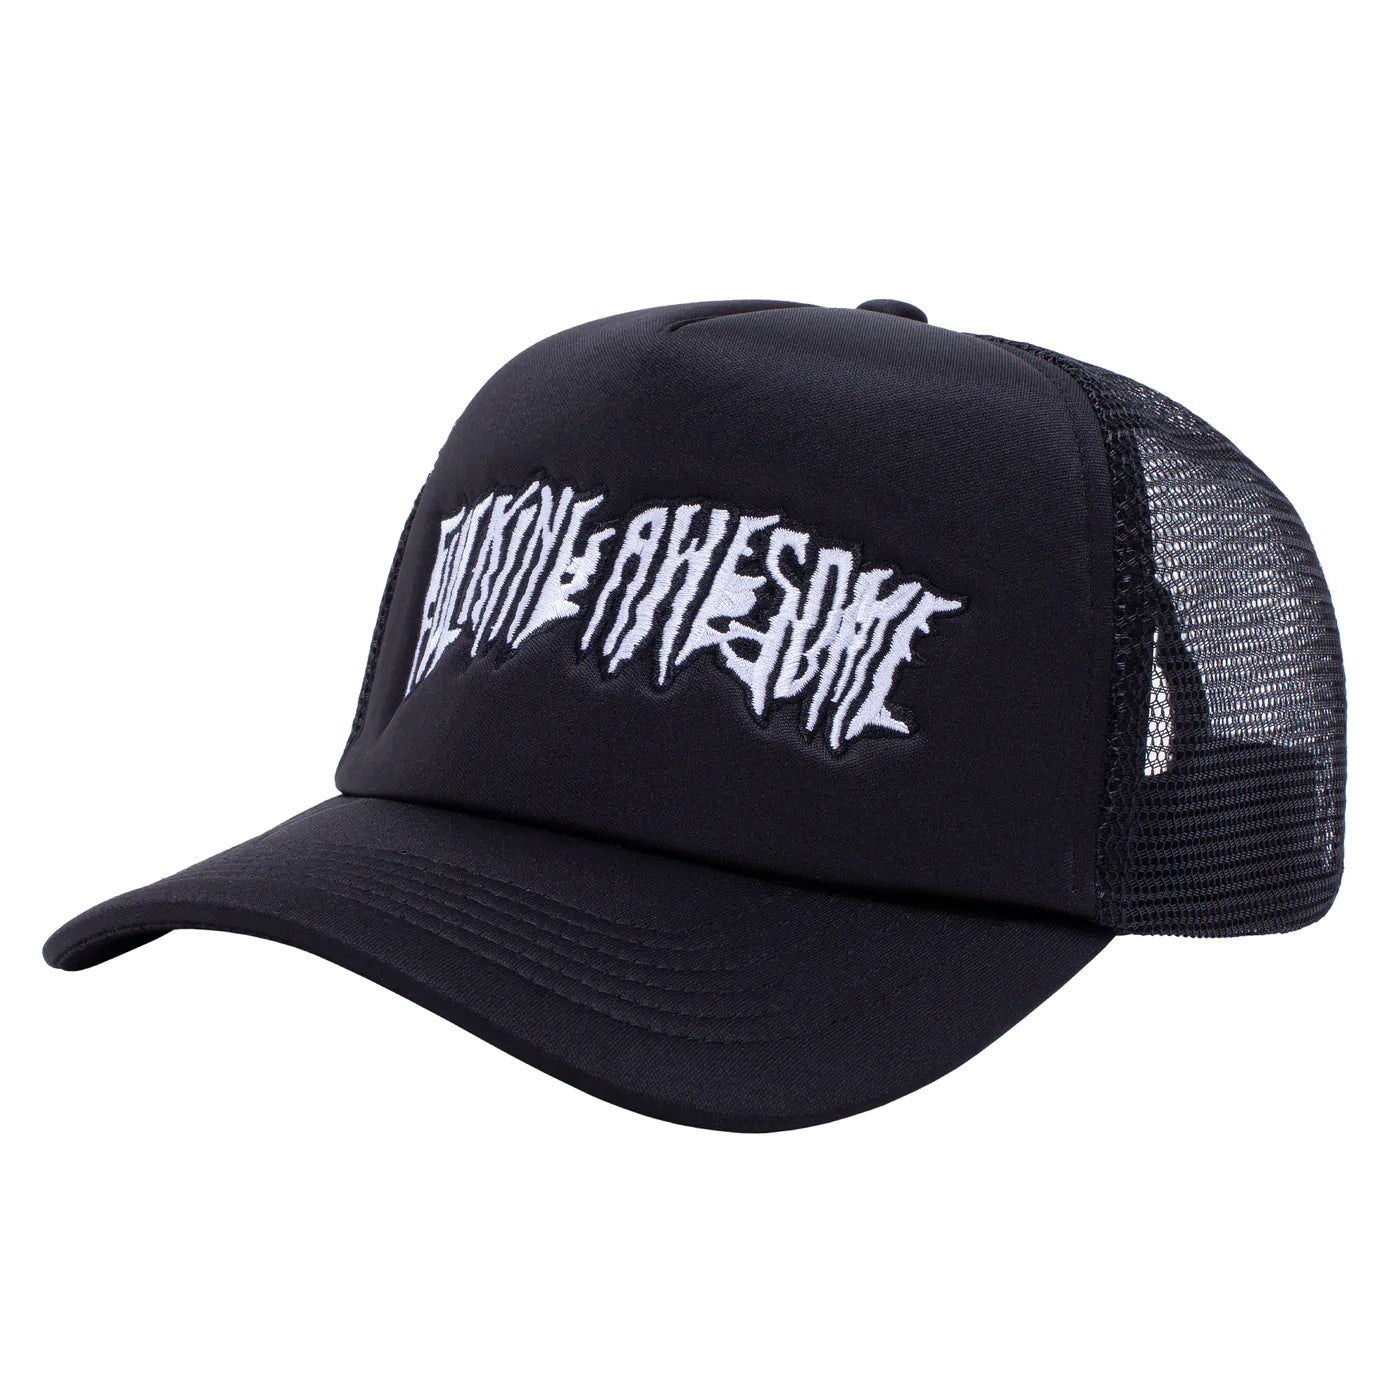 Fucking Awesome Streched Stamp Snapback Cap Black